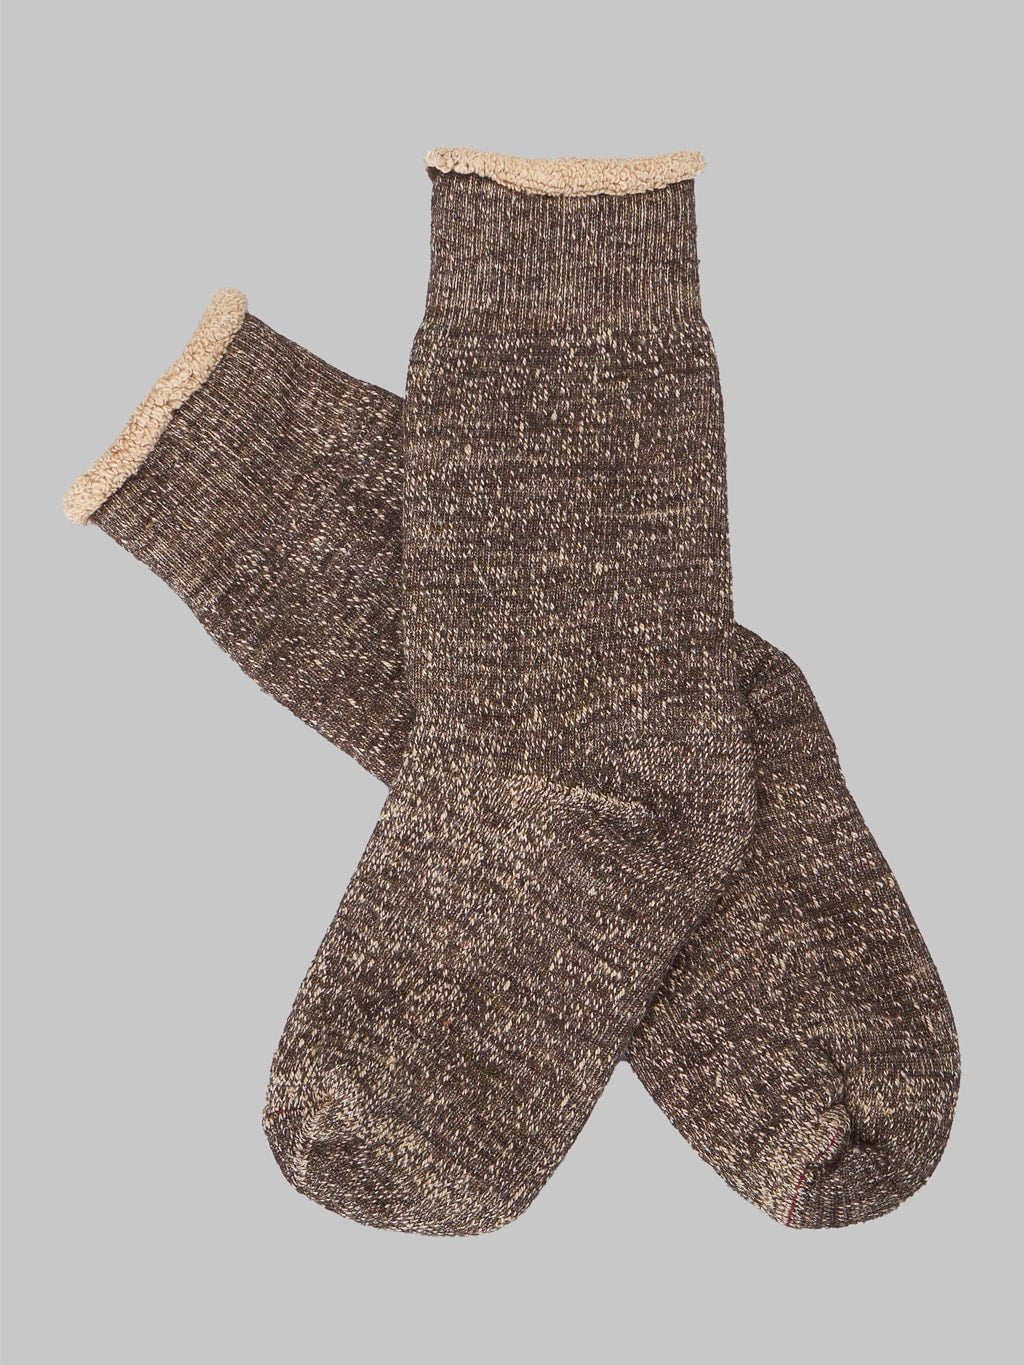 rototo double face crew socks dark brown made in japan